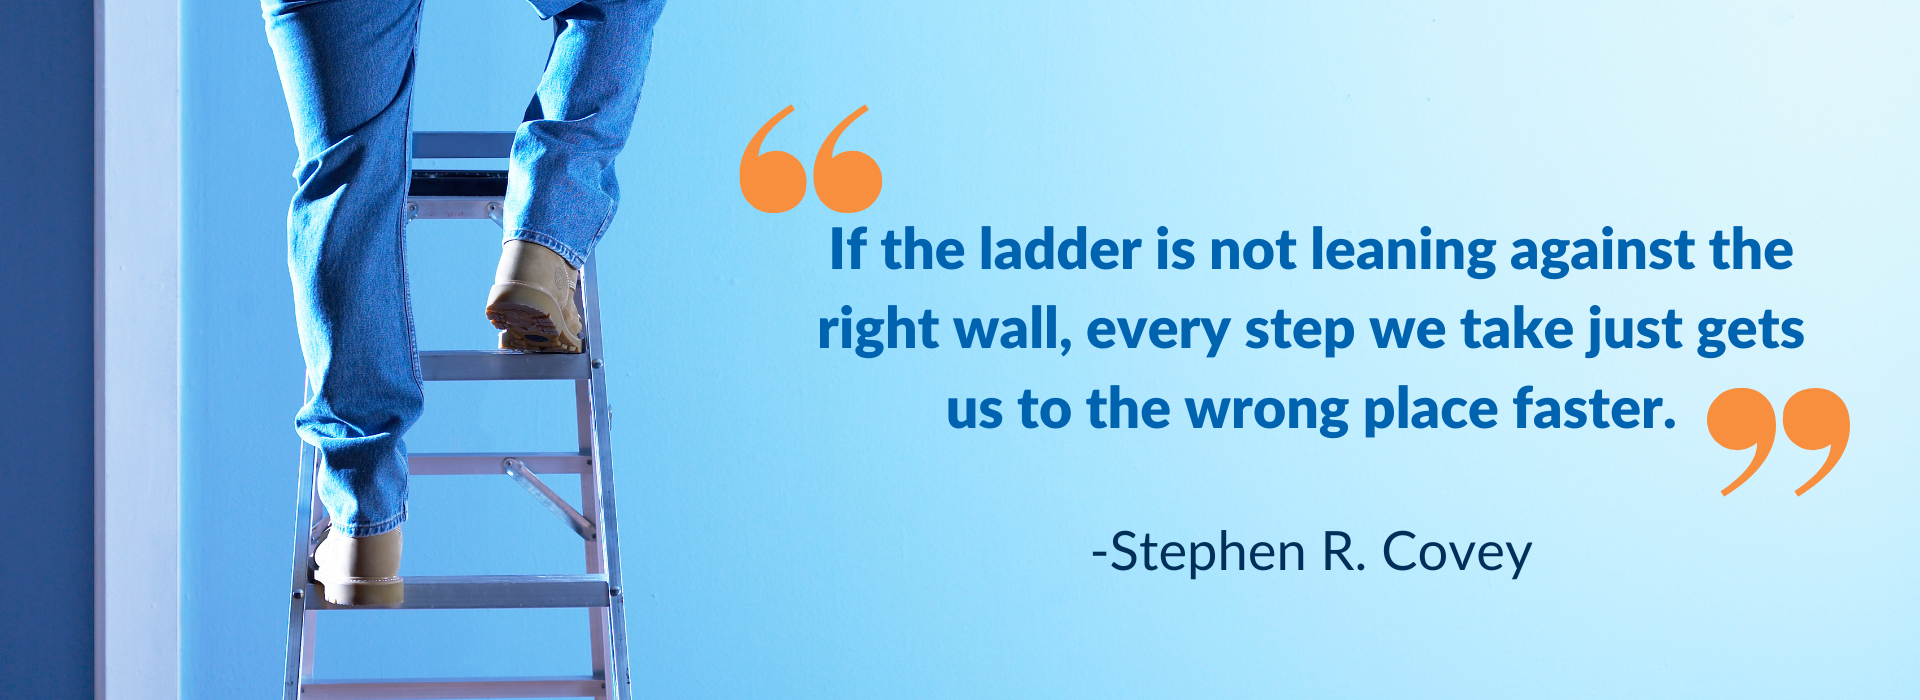 If the ladder is not leaning against the right wall, every step we take just gets us to the wrong place faster.